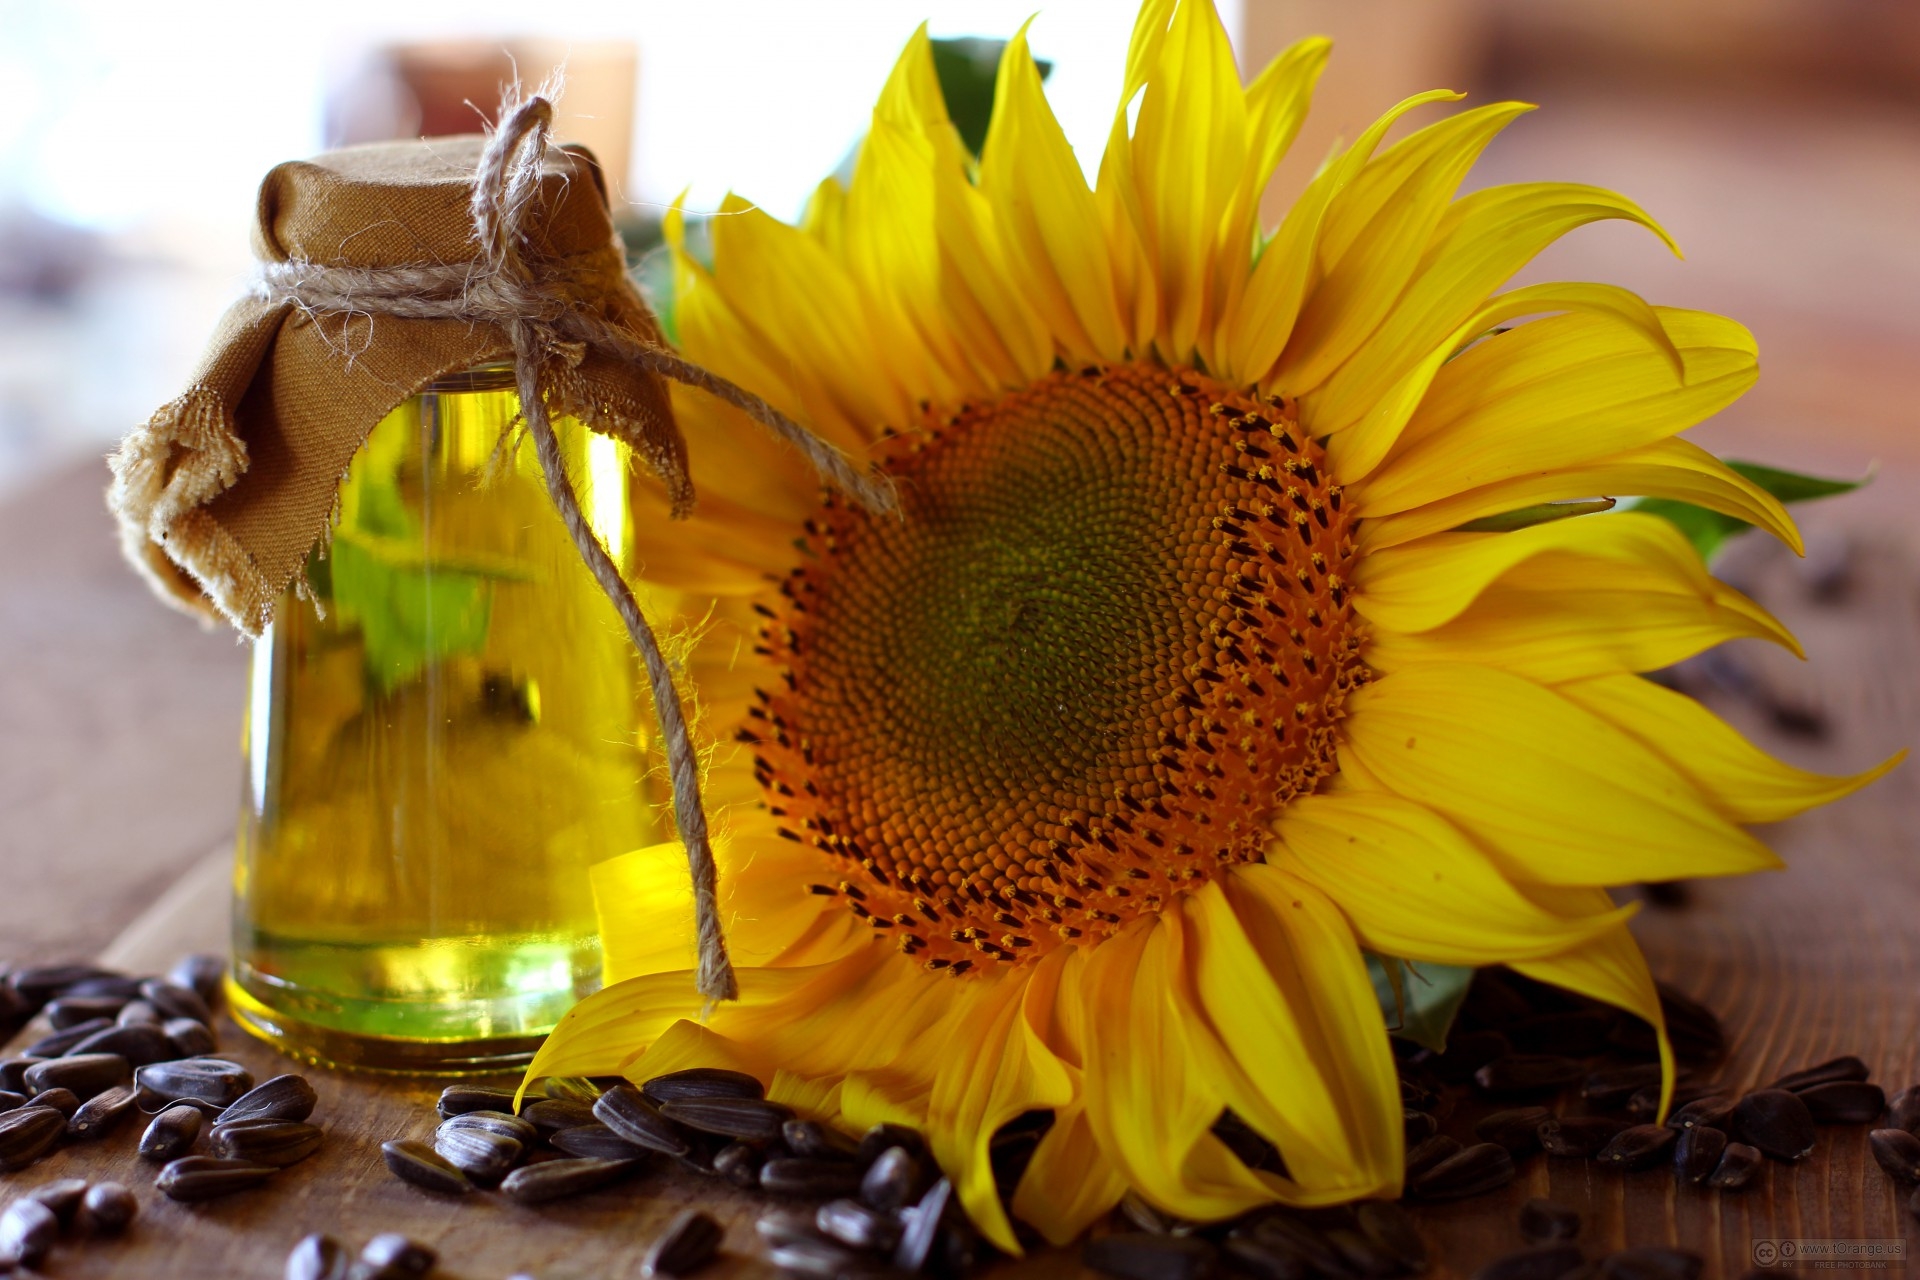 Egyptian GASC purchased only 10 thousand tons of sunflower oil at the tender, but cheaper than in July